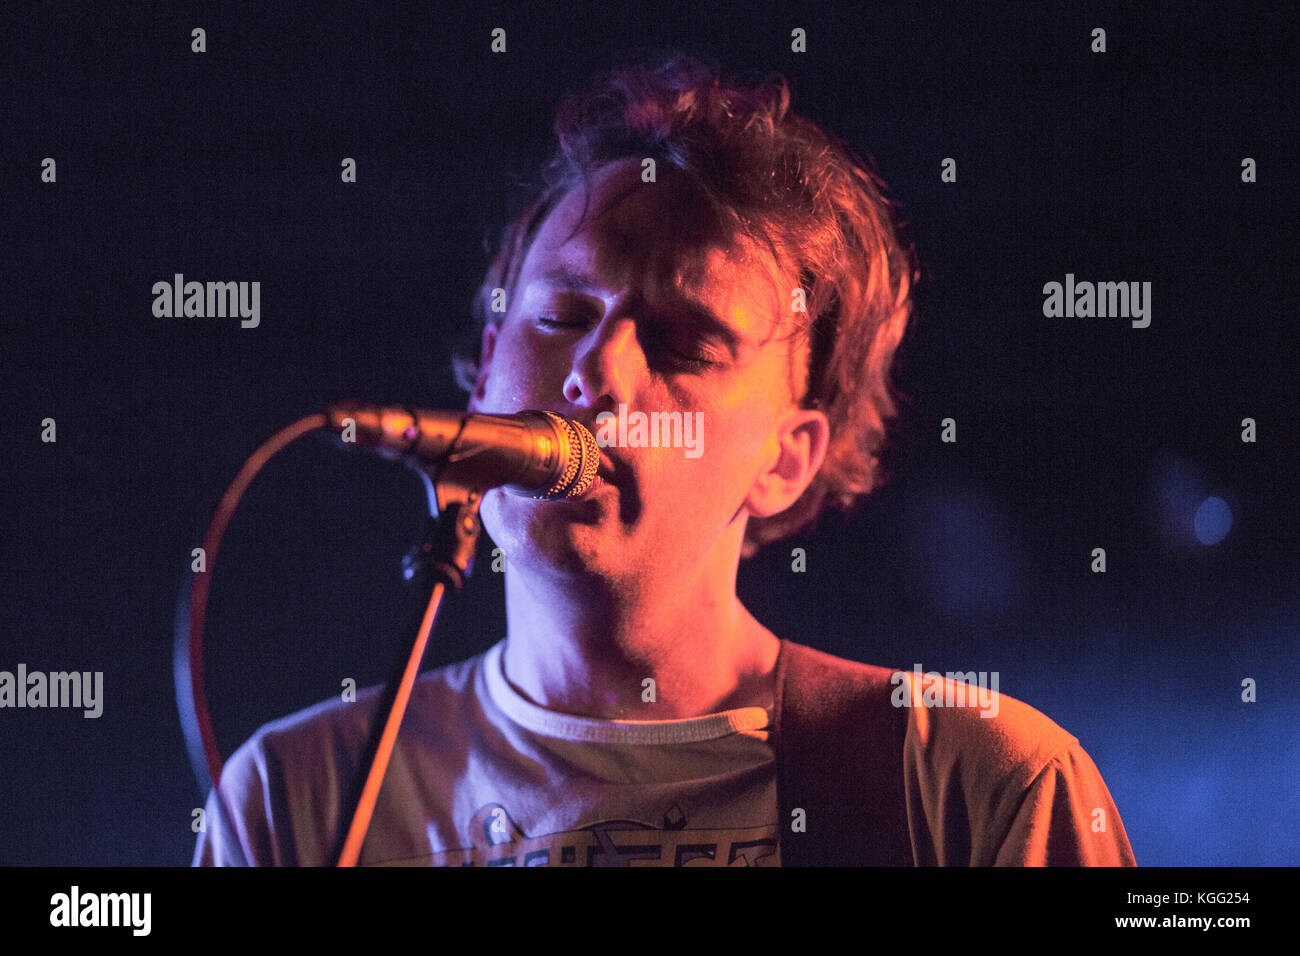 The Australian dream pop band Methyl Ethel performs a live concert at ...